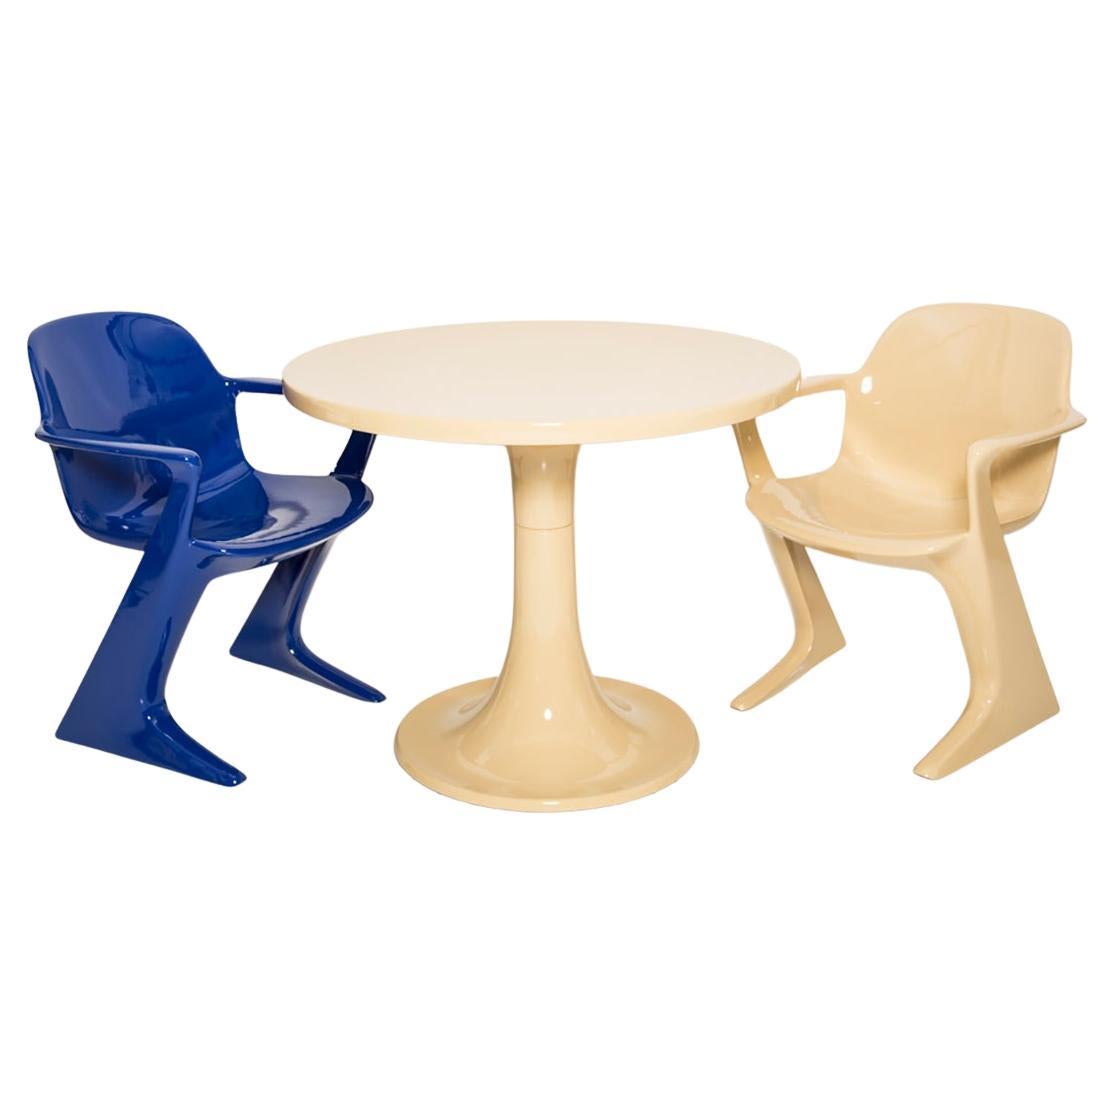 Midcentury Beige and Blue Kangaroo Chairs and Table Ernst Moeckl, Germany, 1968 For Sale